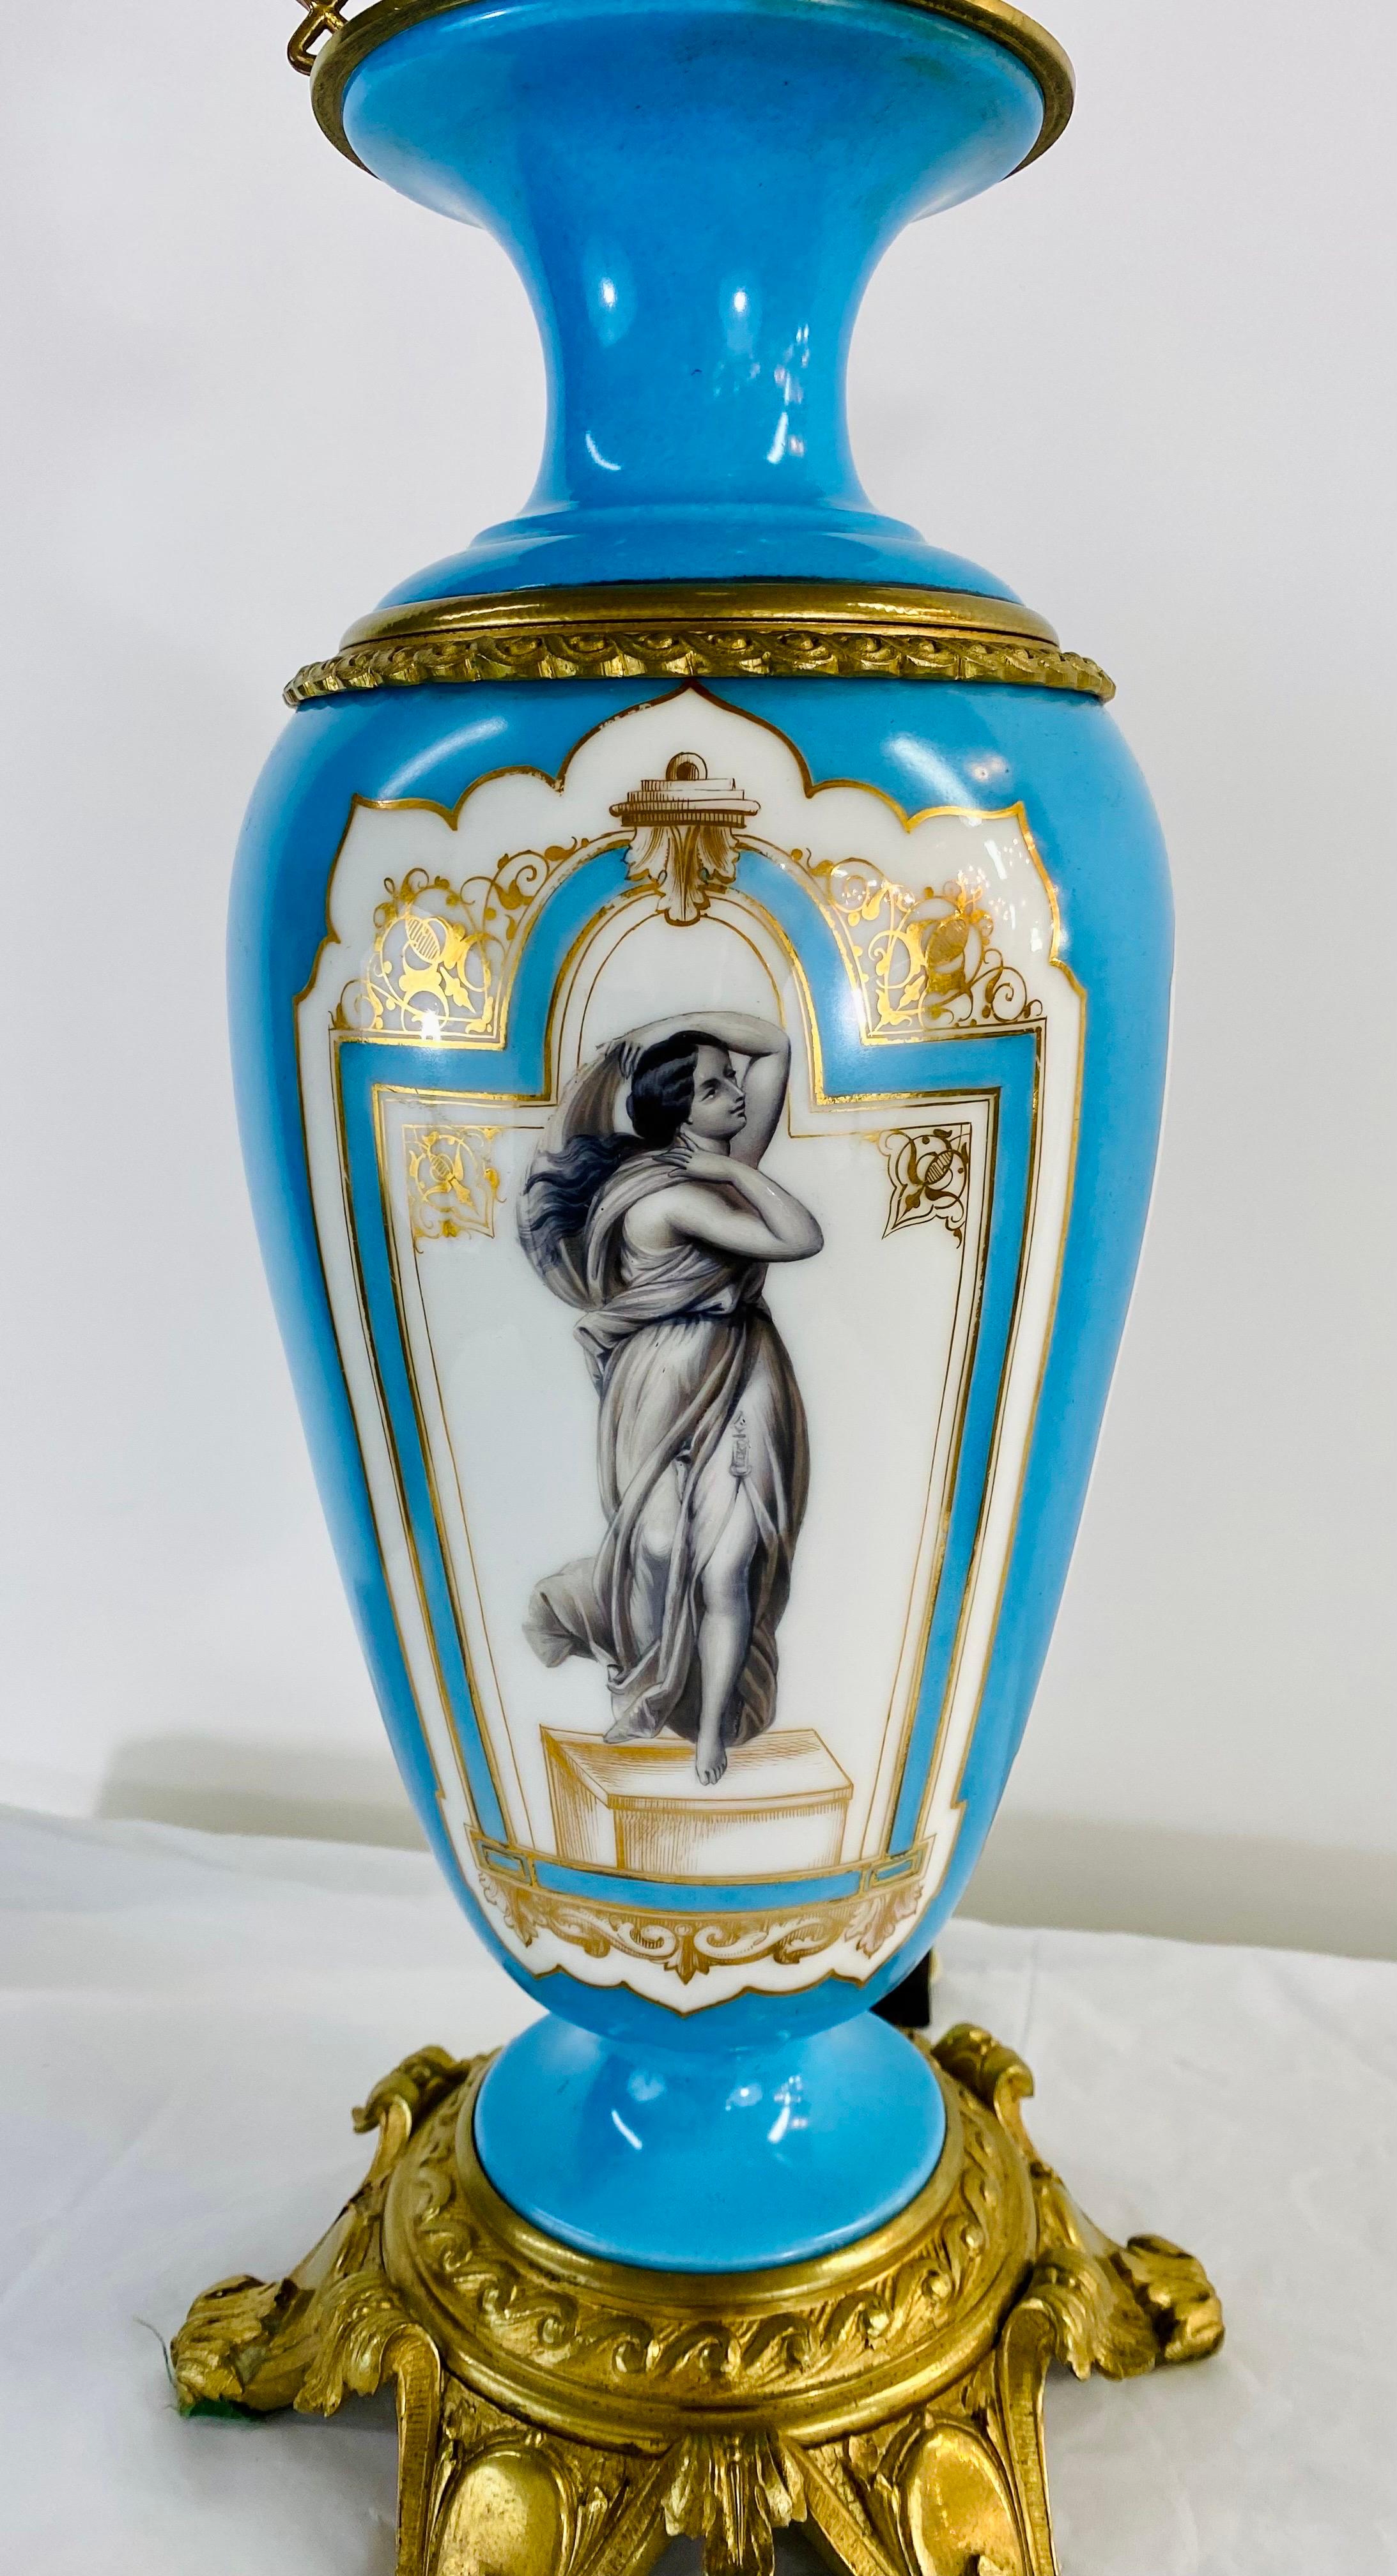 A pair of early 20th century French Neoclassical converted oil table lamps.  The lamps are made of porcelain and are beautiful hand painted featuring a woman portrait in the middle and  painted in white and blue. The elegant lamps are brass mounted